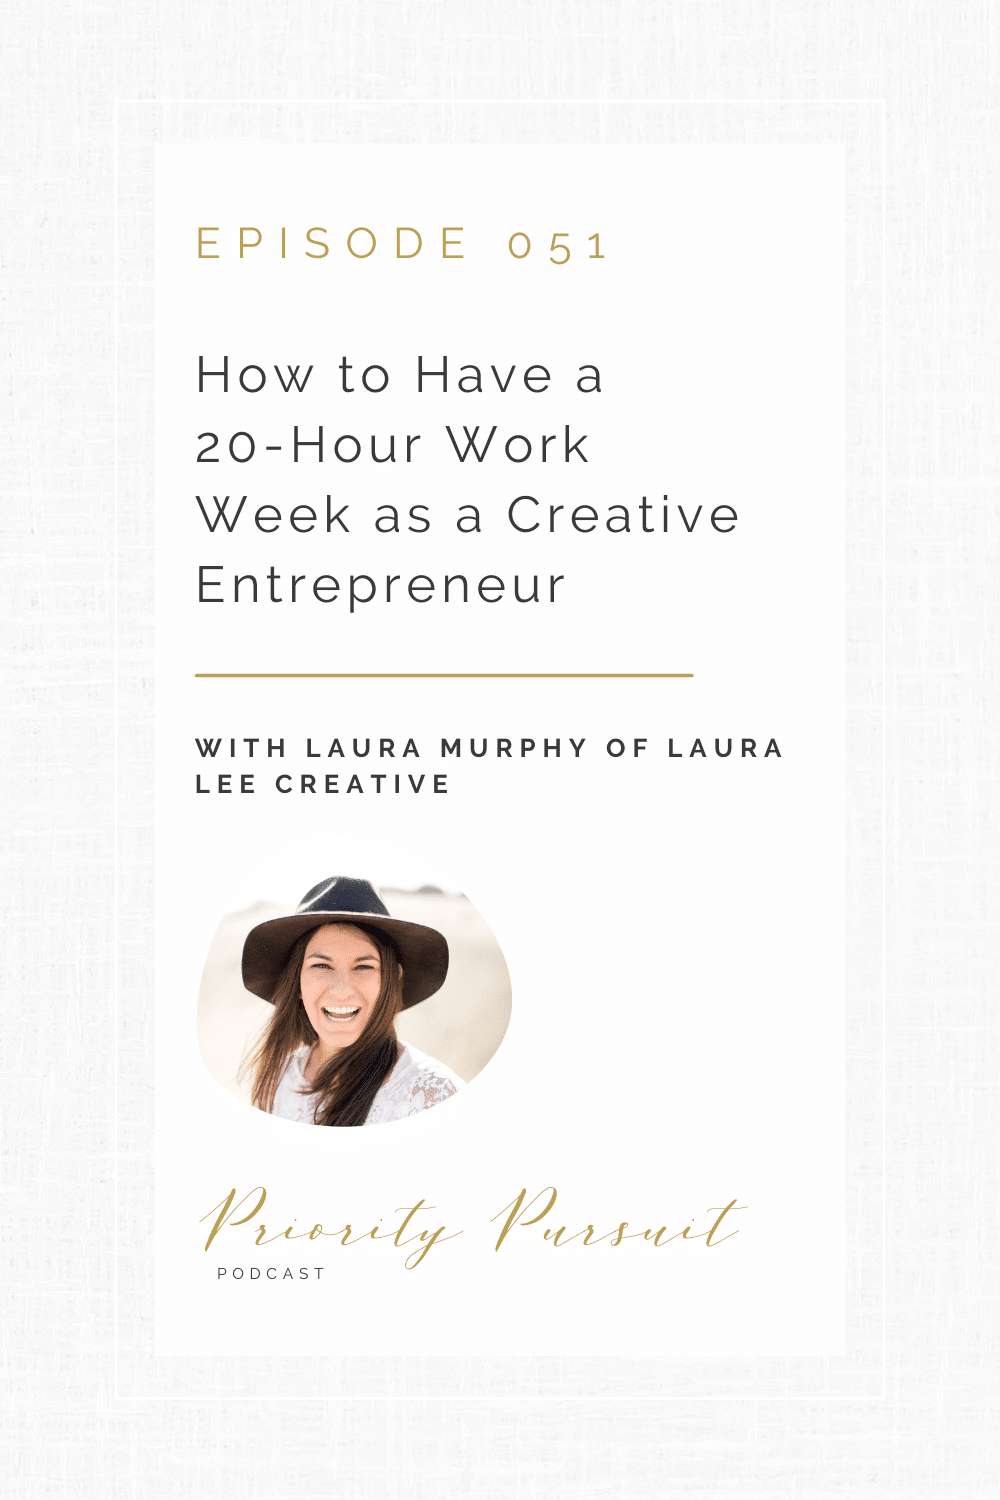 Victoria Rayburn and Laura Murphy discuss how to have a 20-hour work week as a creative entrepreneur